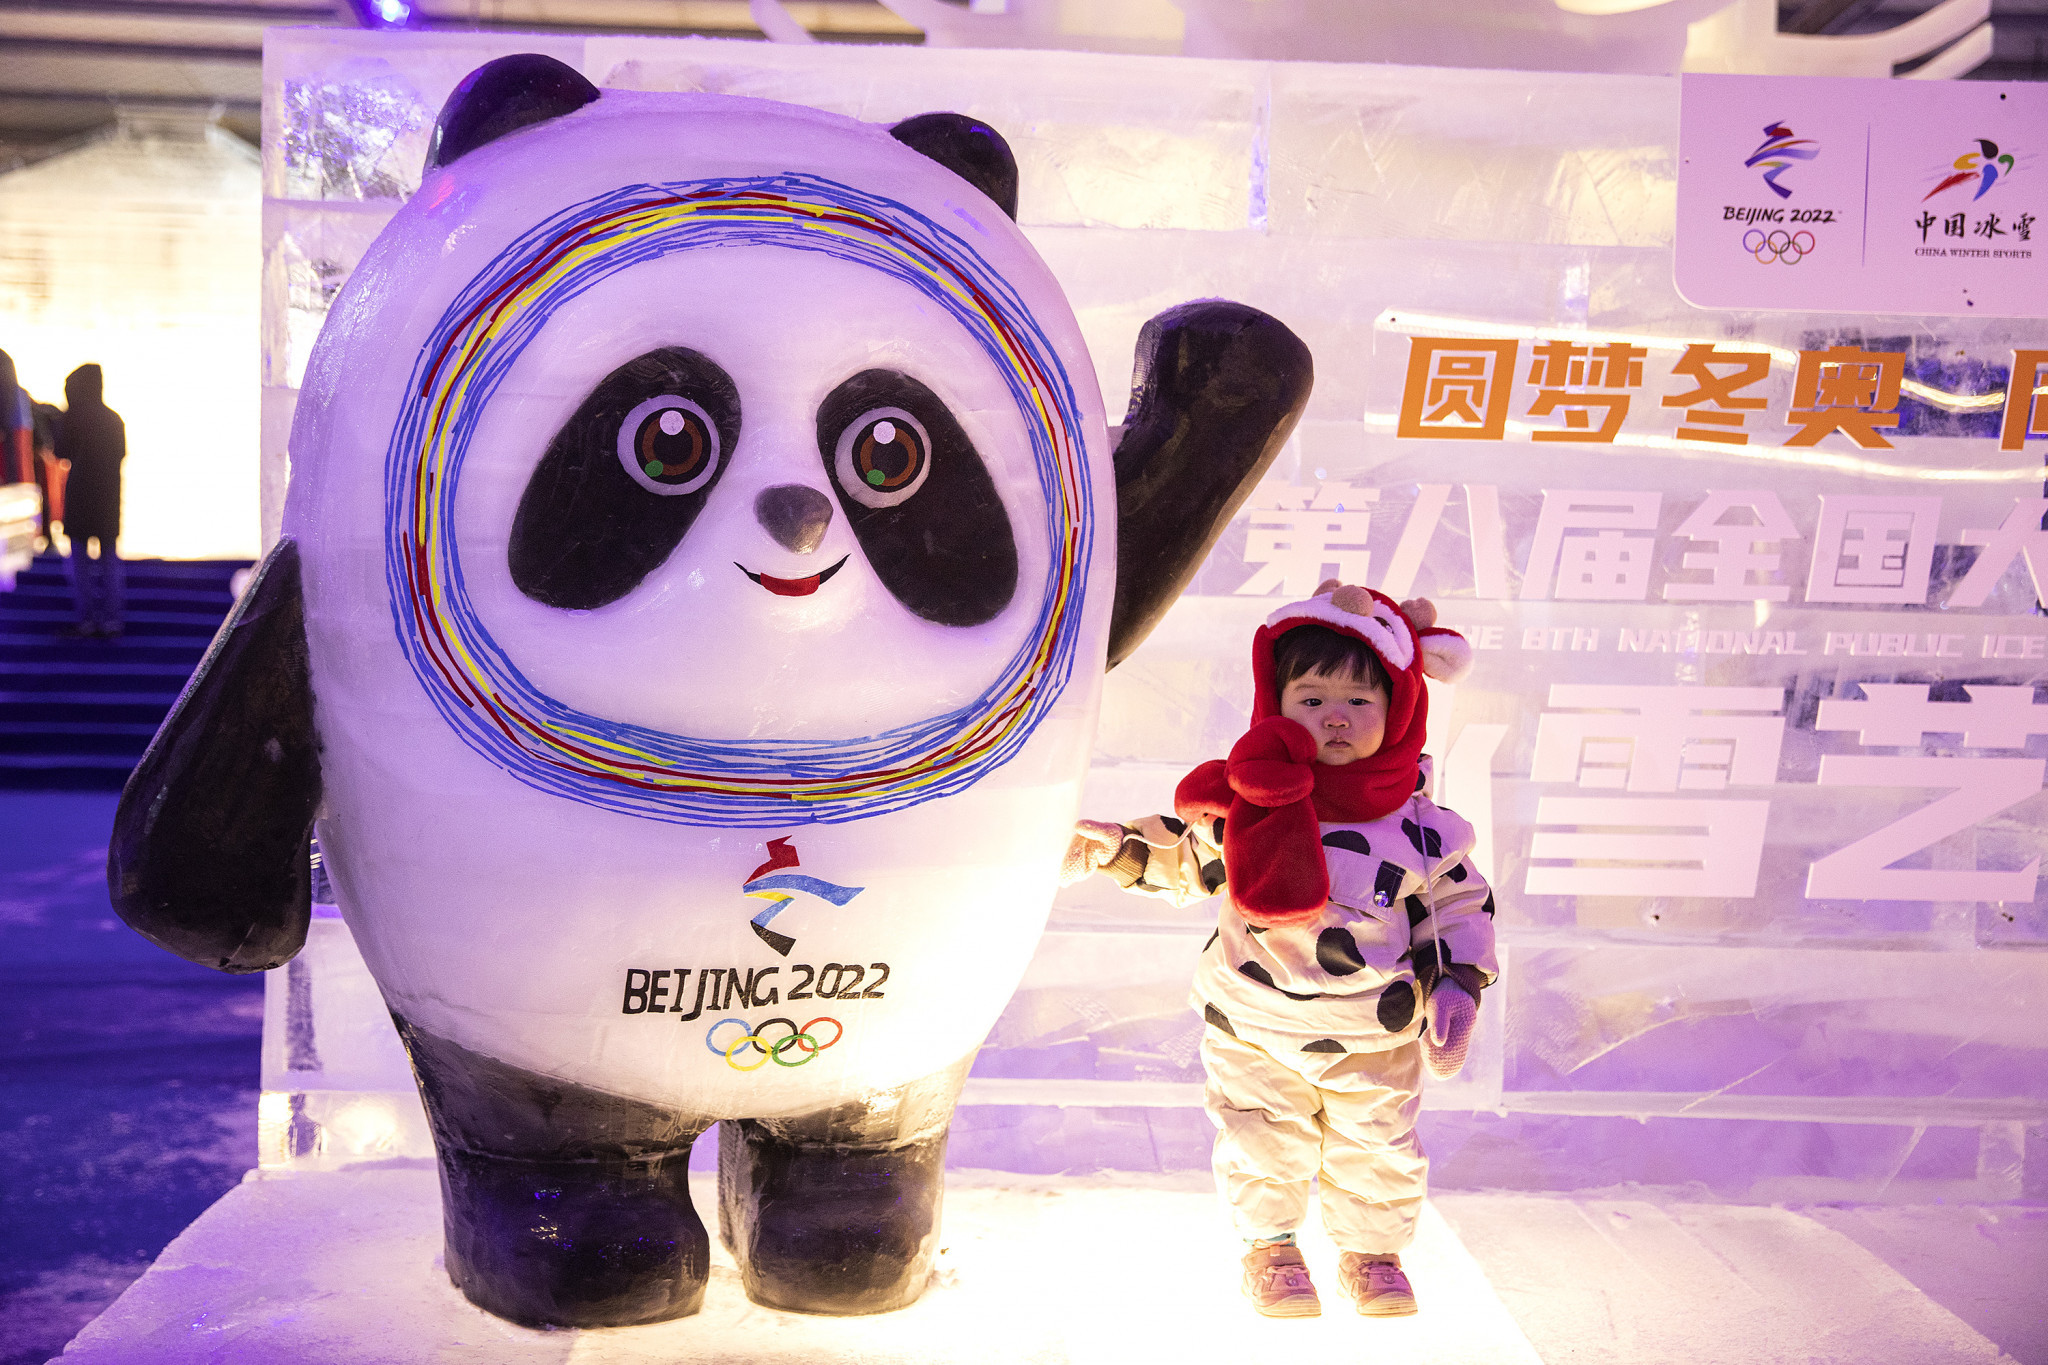 Medallists will also receive special Beijing 2022 mascots ©Getty Images